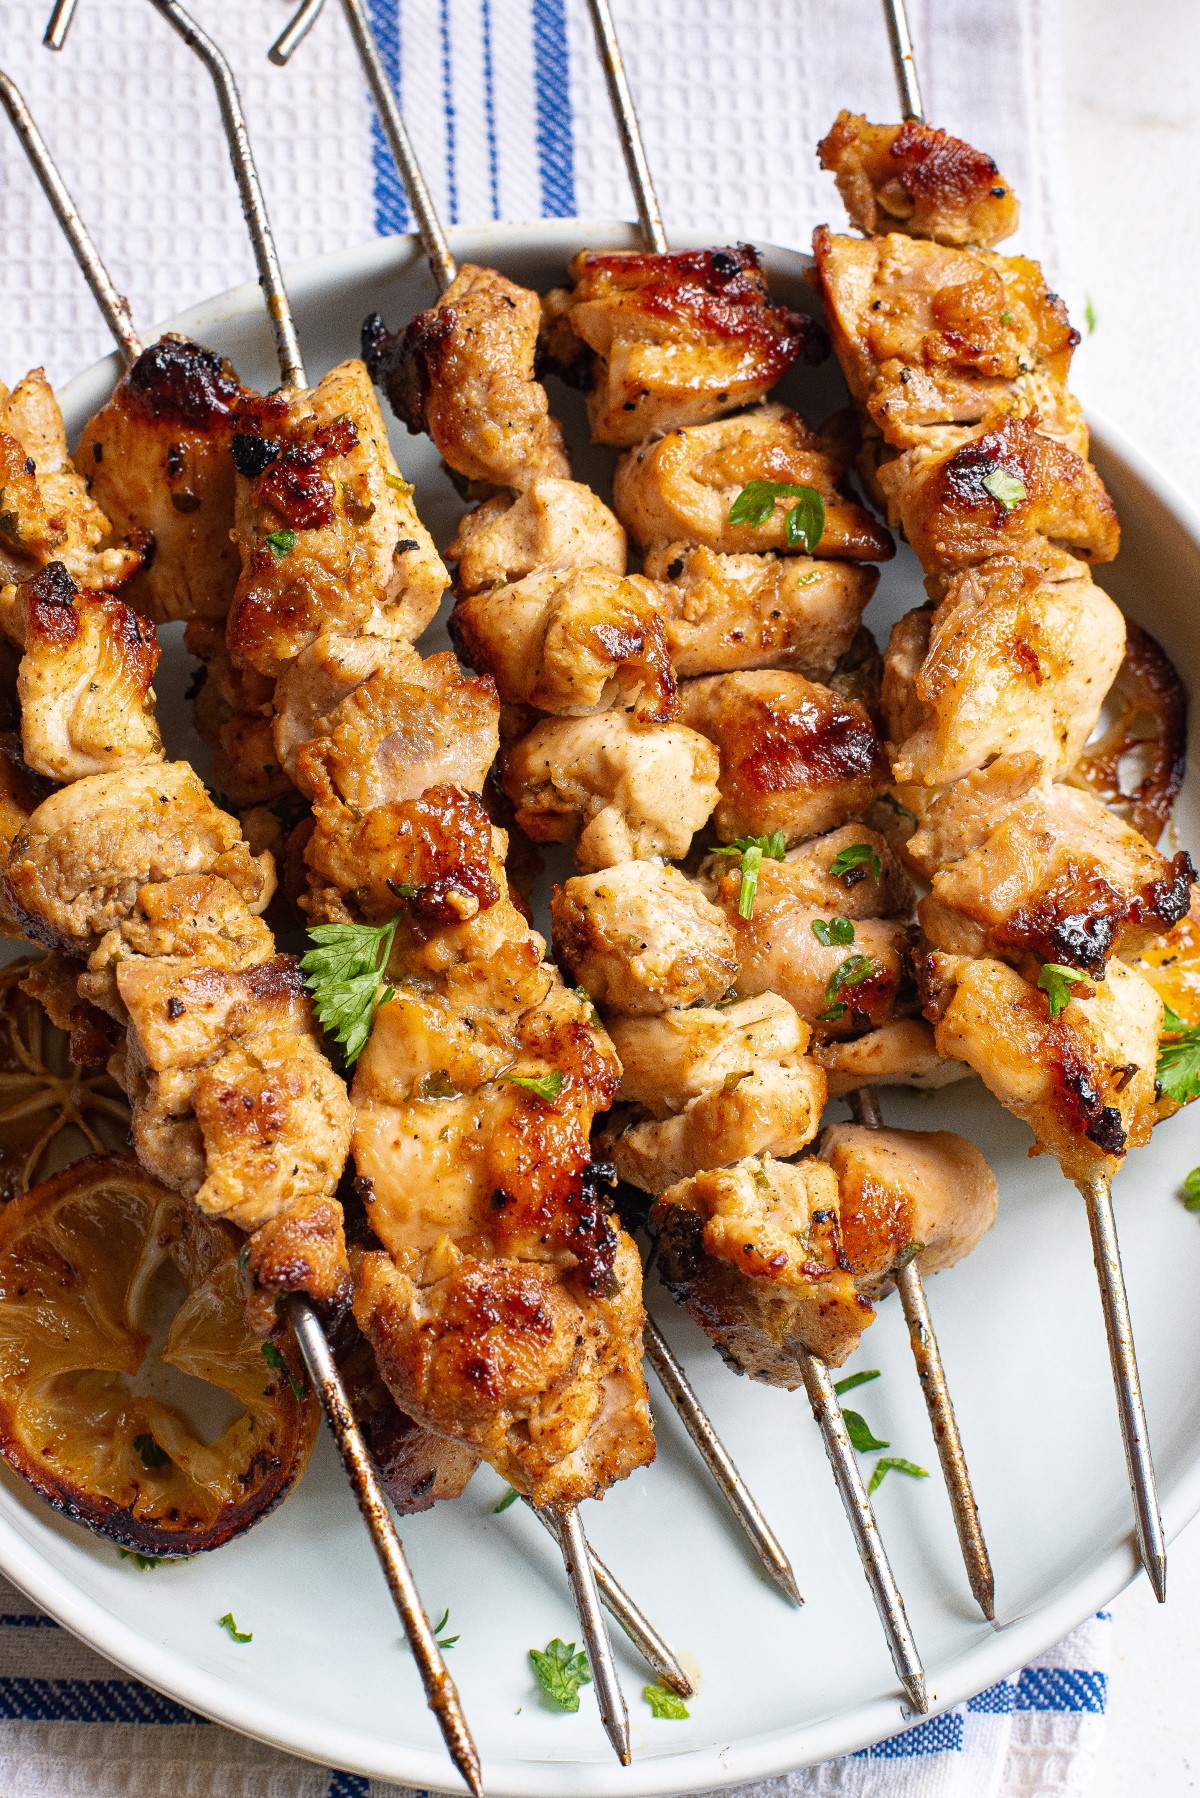 Skewers of Lemon Greek Chicken kabobs served on a plate with lemon slices and chopped parsley.